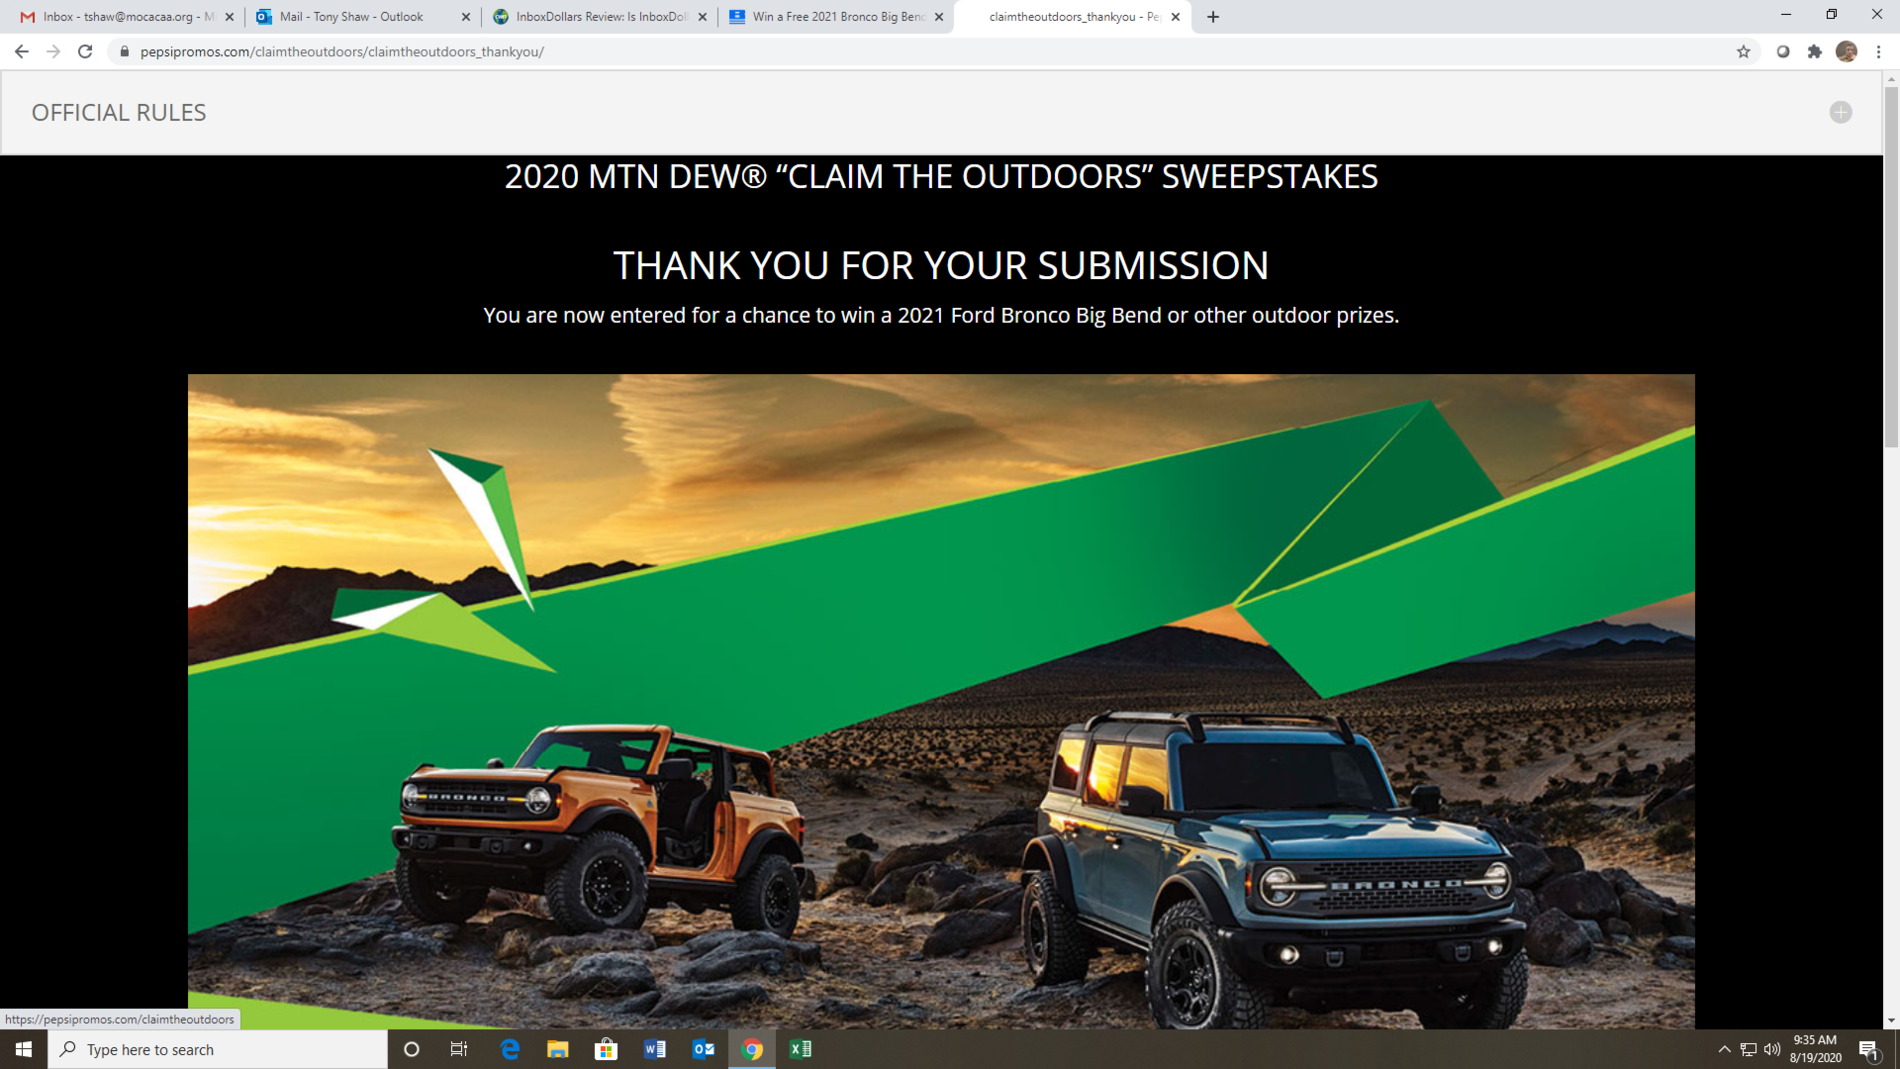 Ford Bronco Win a Free 2021 Bronco Big Bend from Mountain Dew 1597847827473